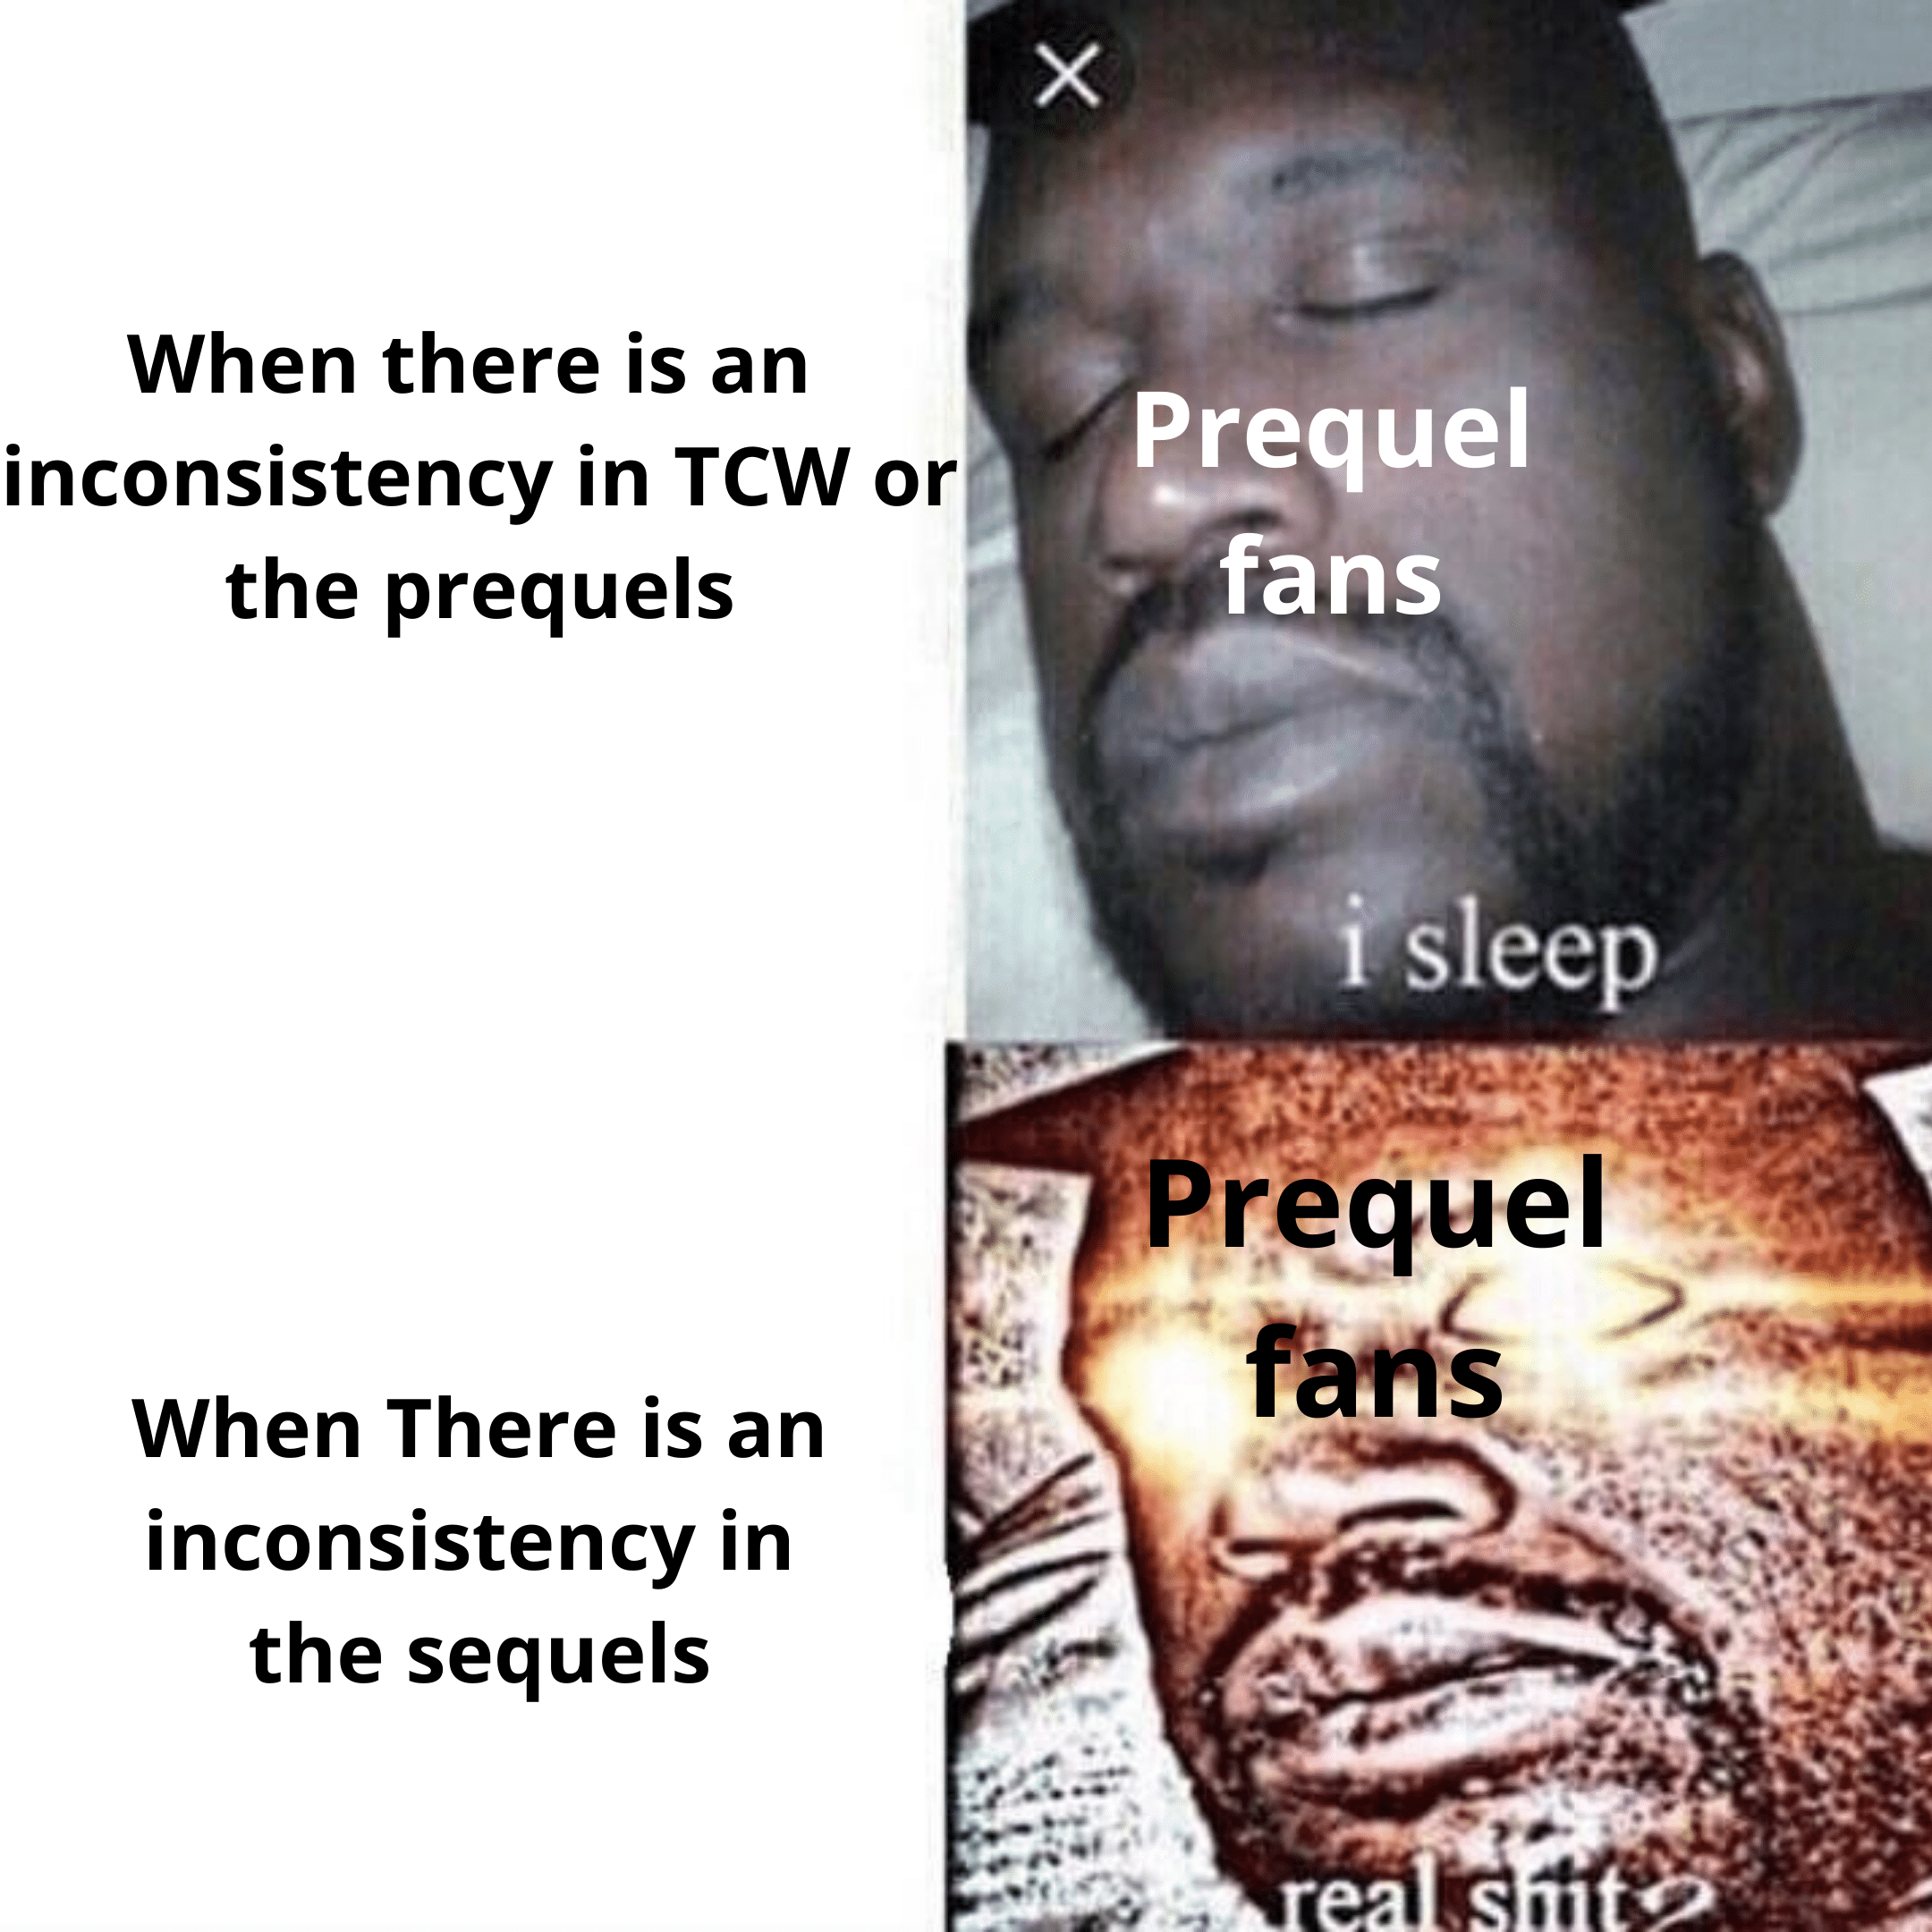 Sequel-memes, Luke, Star Wars, Leia, LEIA, Jedi Star Wars Memes Sequel-memes, Luke, Star Wars, Leia, LEIA, Jedi text: When there is an inconsistency in TCW or the prequels When There is an inconsistency in the sequels Prequel fans i sleep Prequel fåns 